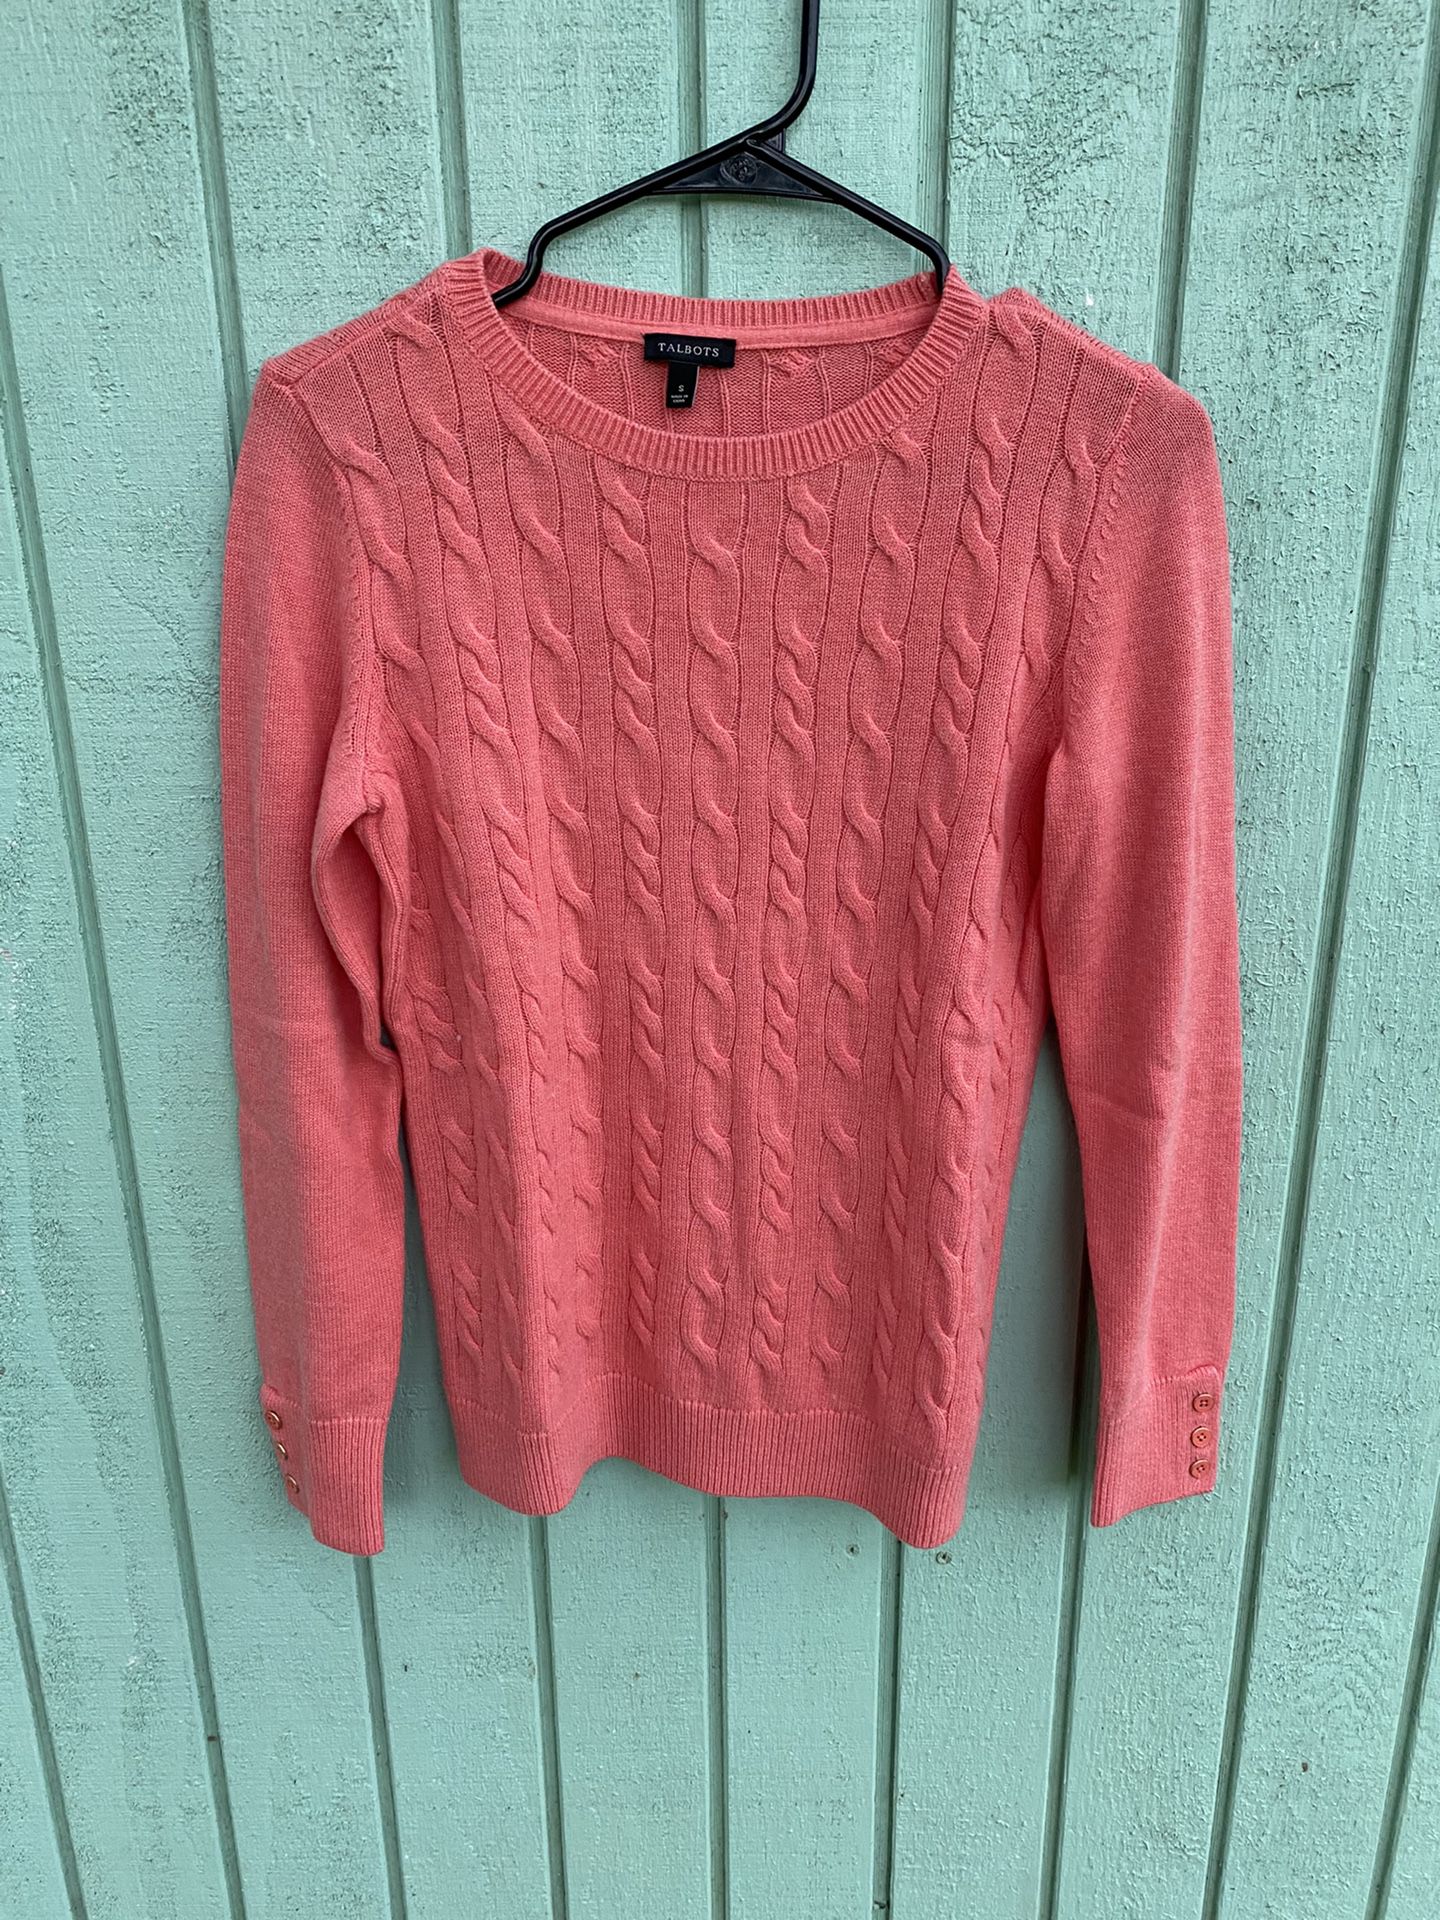 Talbot’s Soft Coral Colored Sweater Size Small